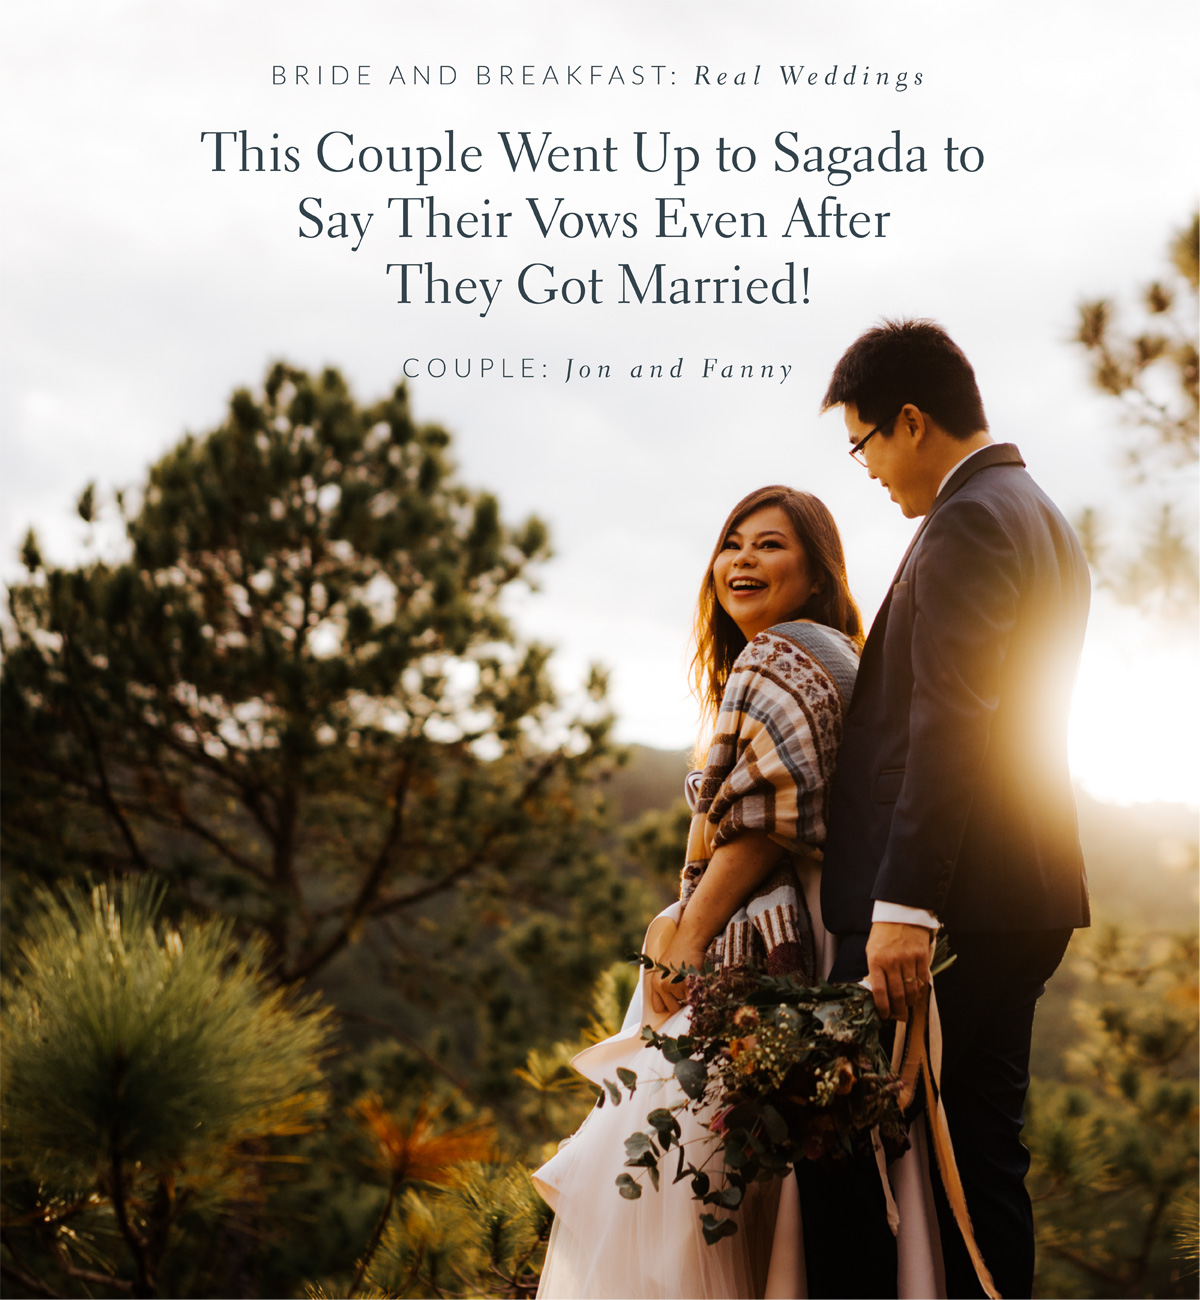 This Couple Went Up to Sagada to Say Their Vows Even After They Got Married!